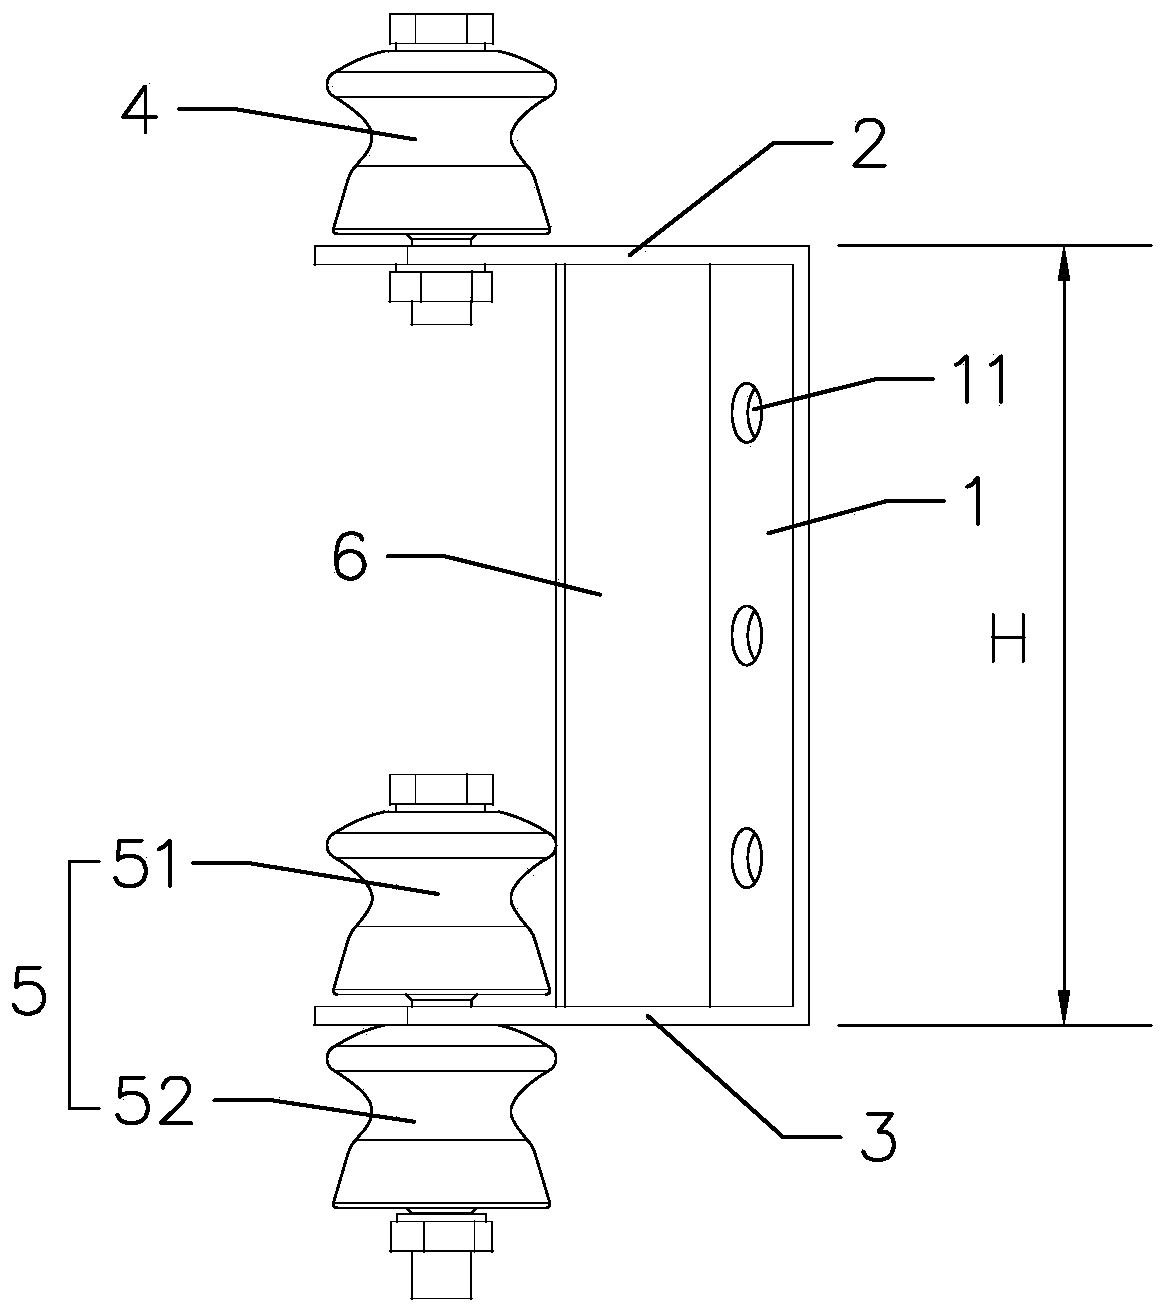 Interconnected bracket in compatible with weak electric line and wiring method